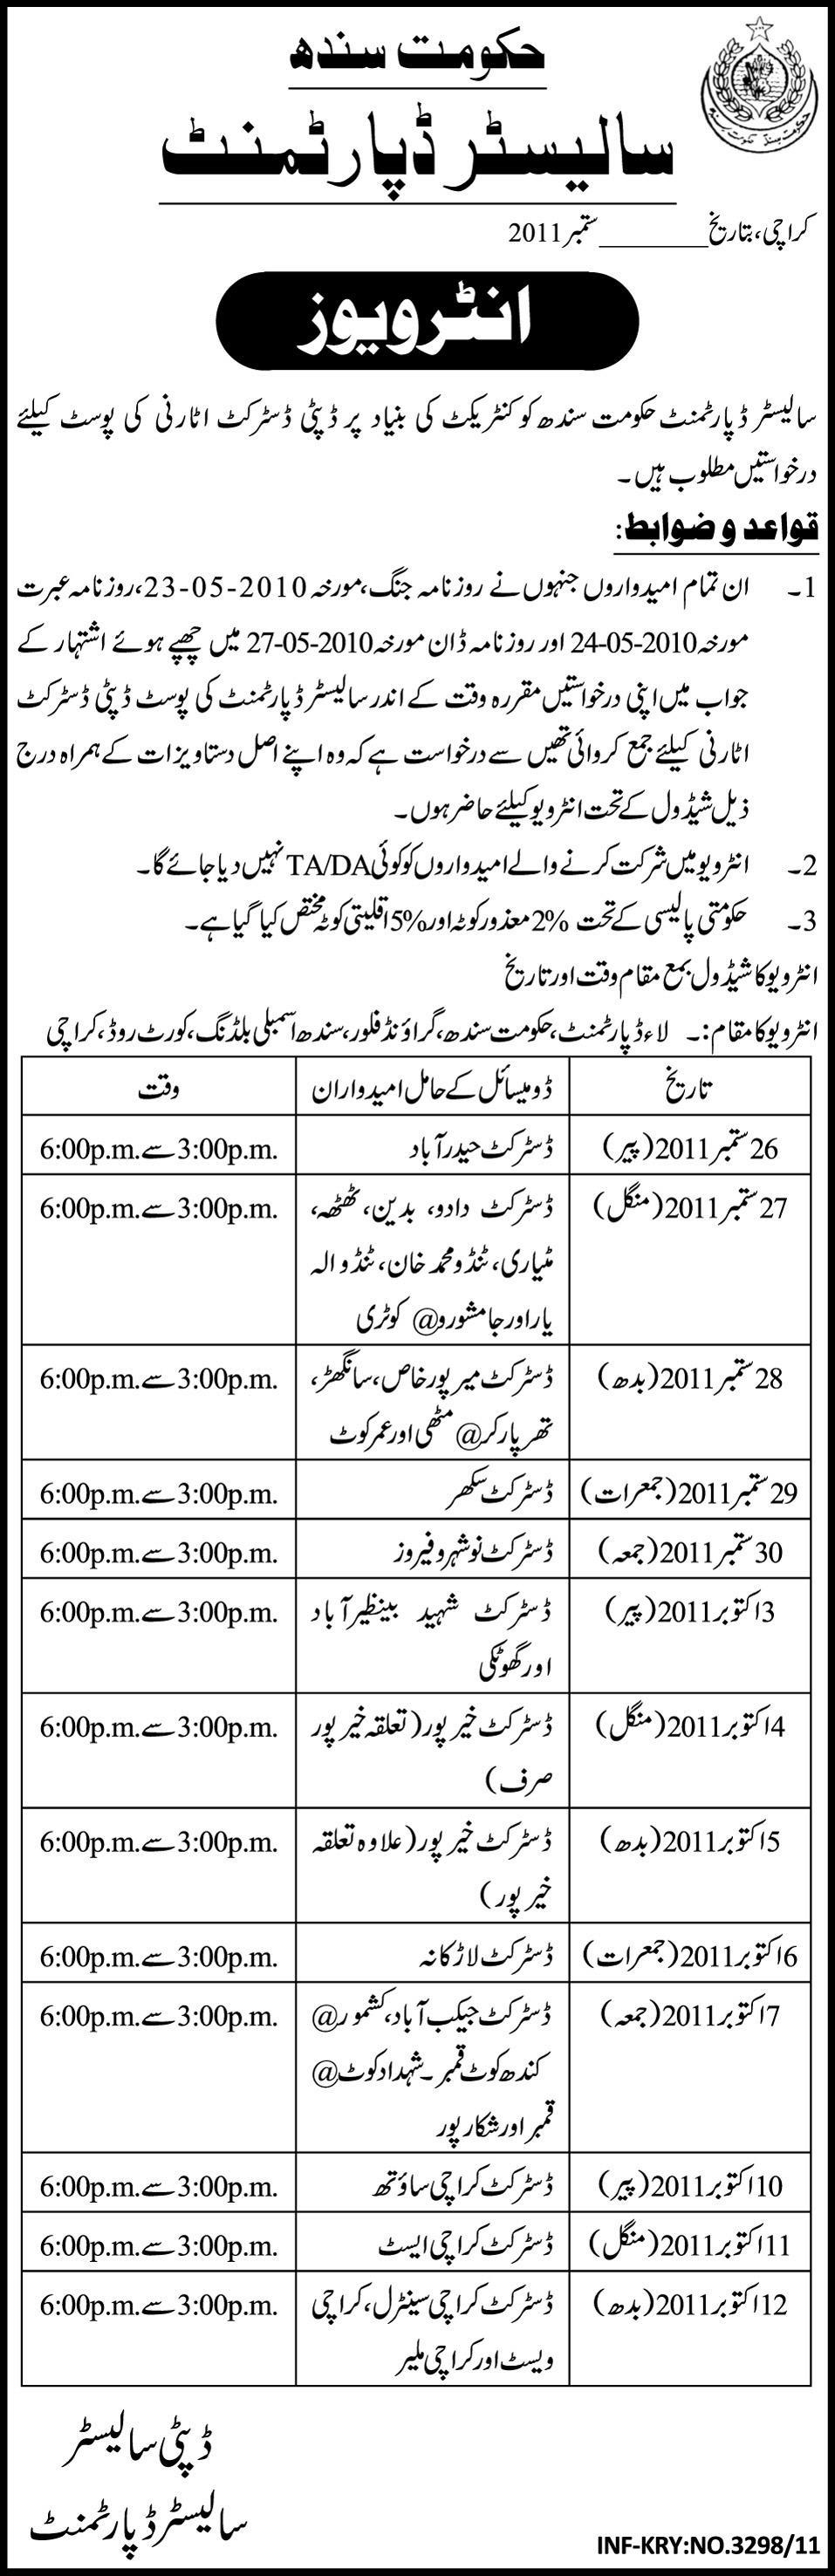 Job Opportunity in Government Sector (Sindh)